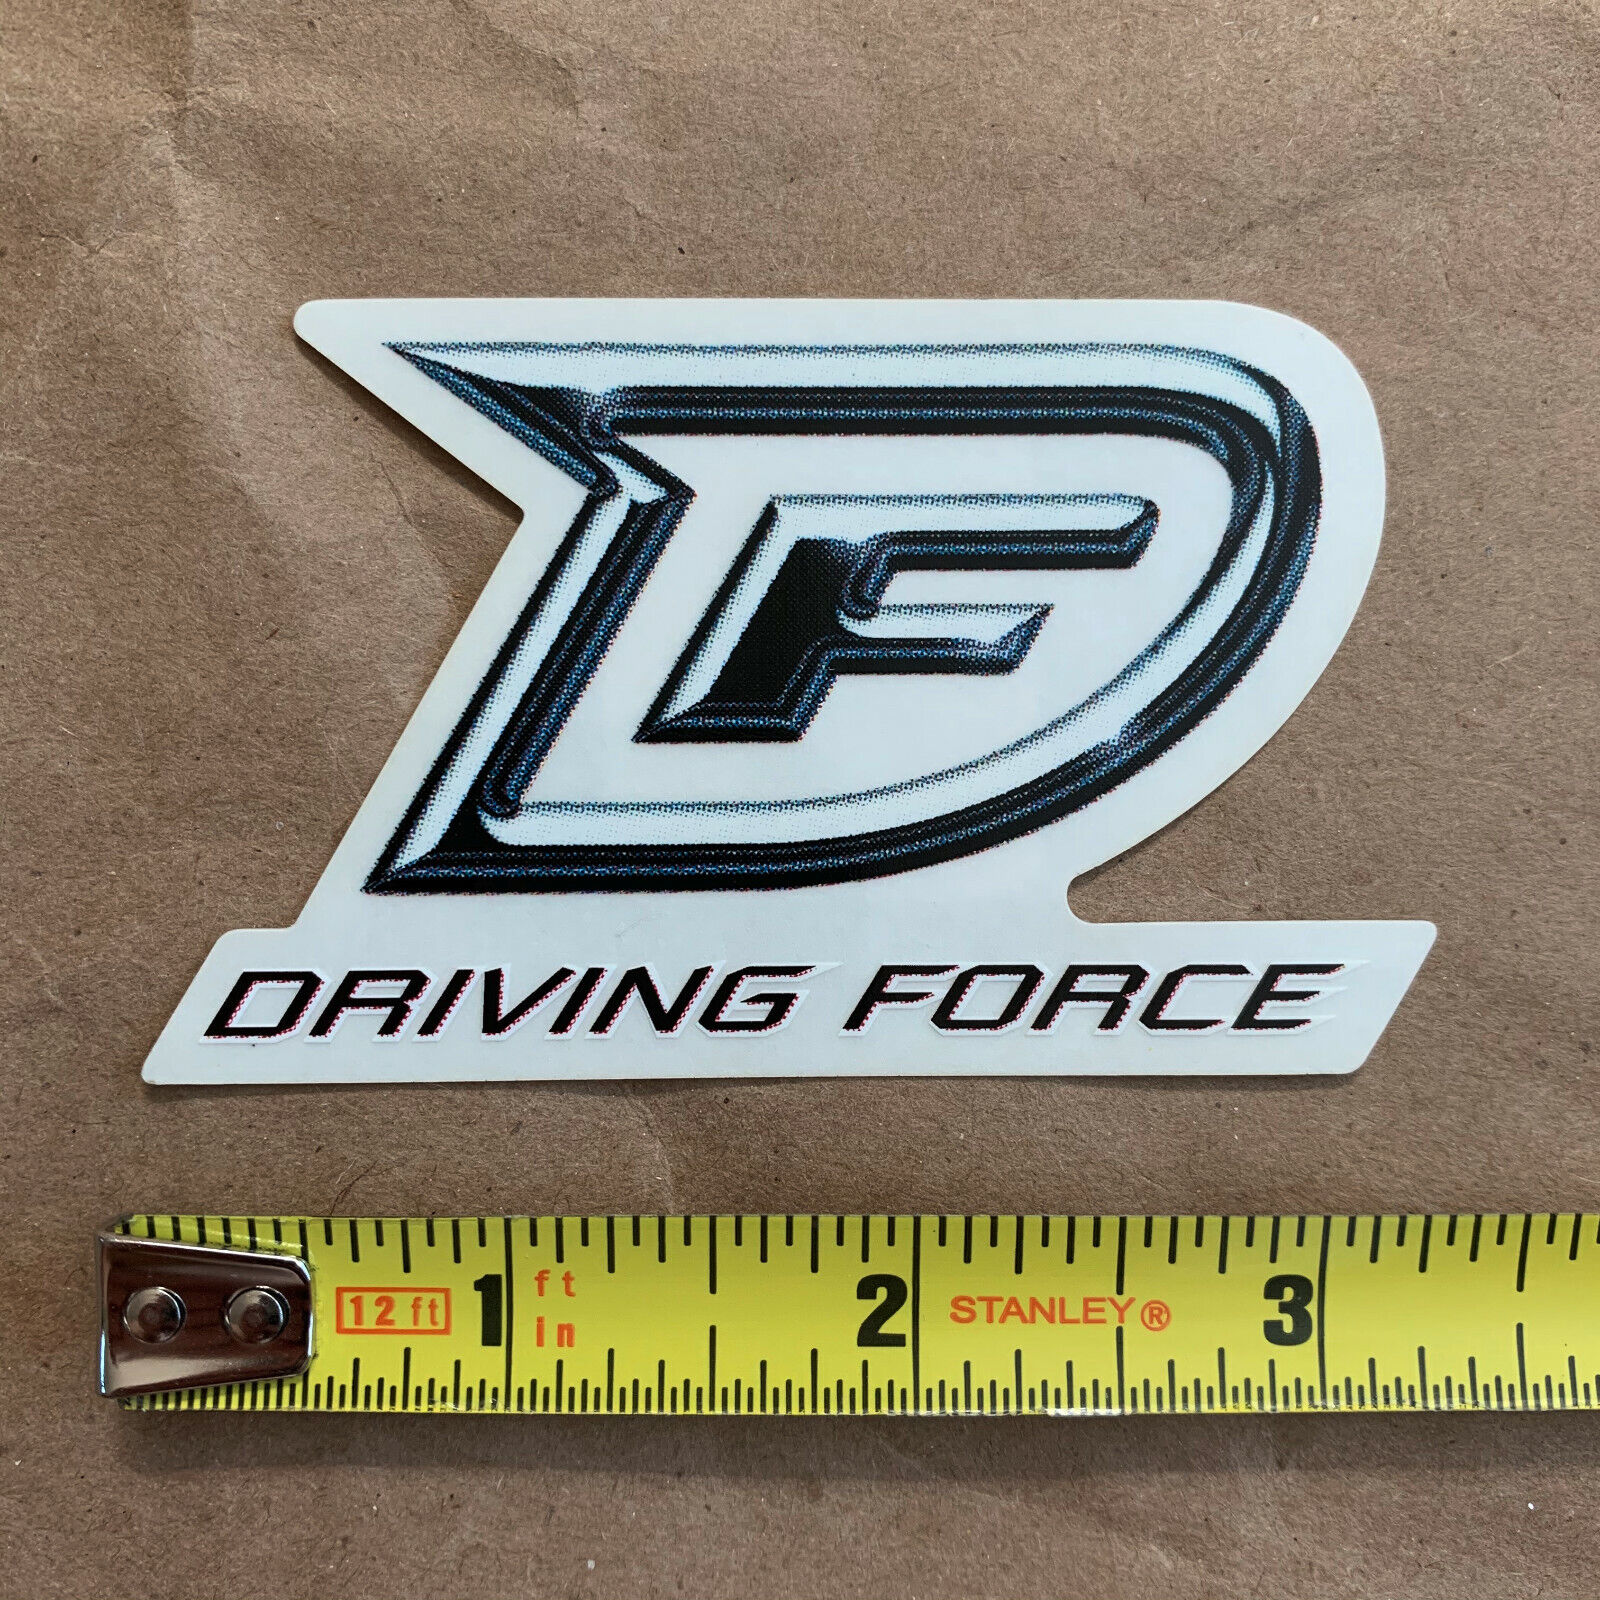 No Fear Driving Force sticker decal, genuine, original, vintage, 3.25" x 2", NEW